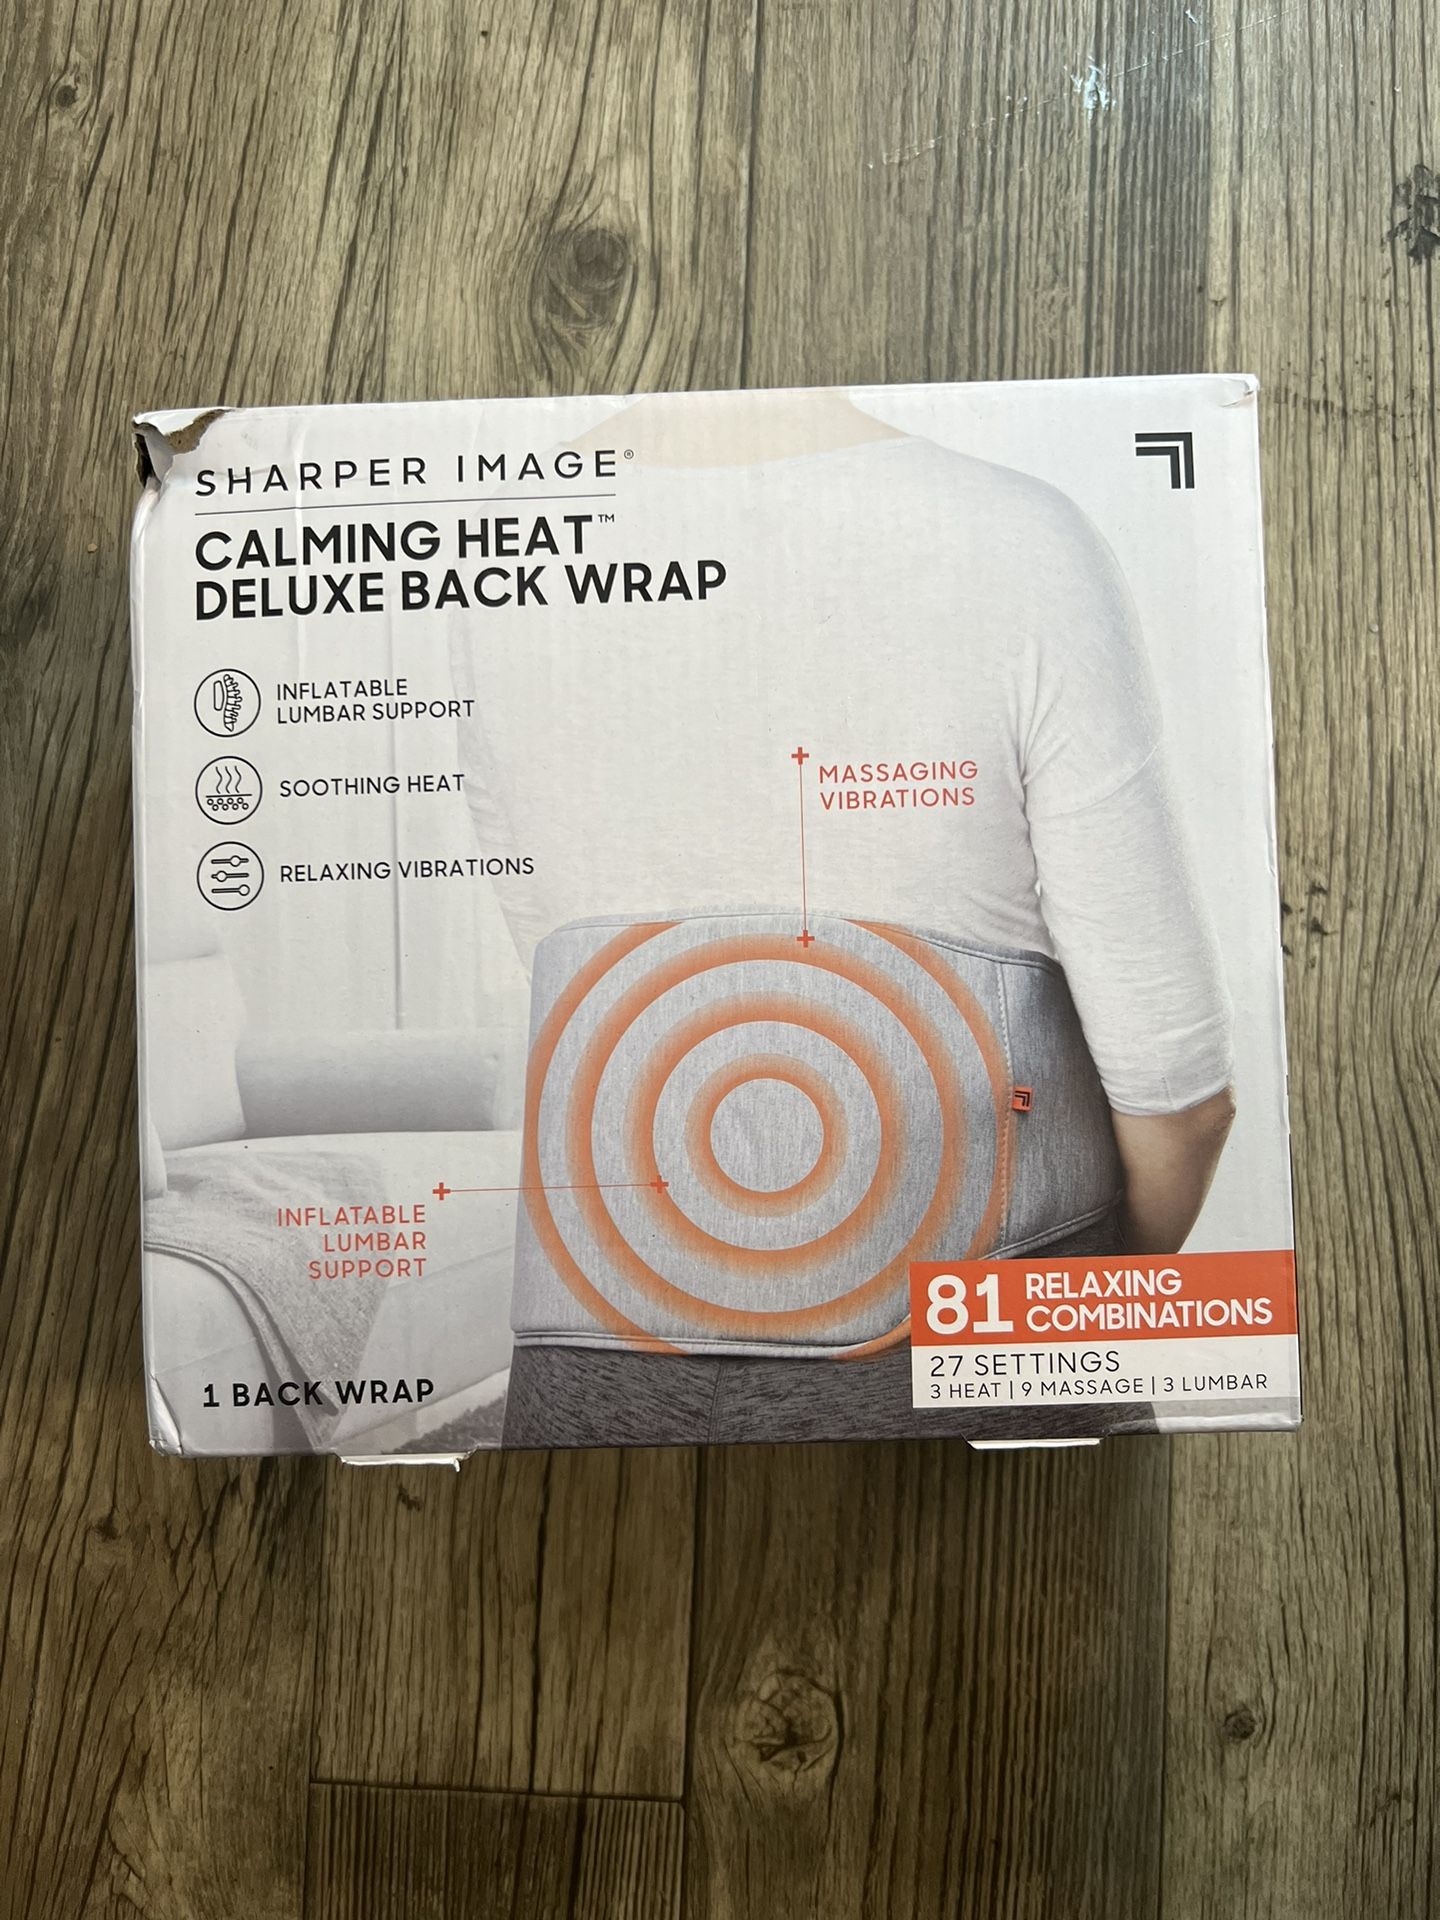 Calming Heat Back Wrap Deluxe by Sharper Image